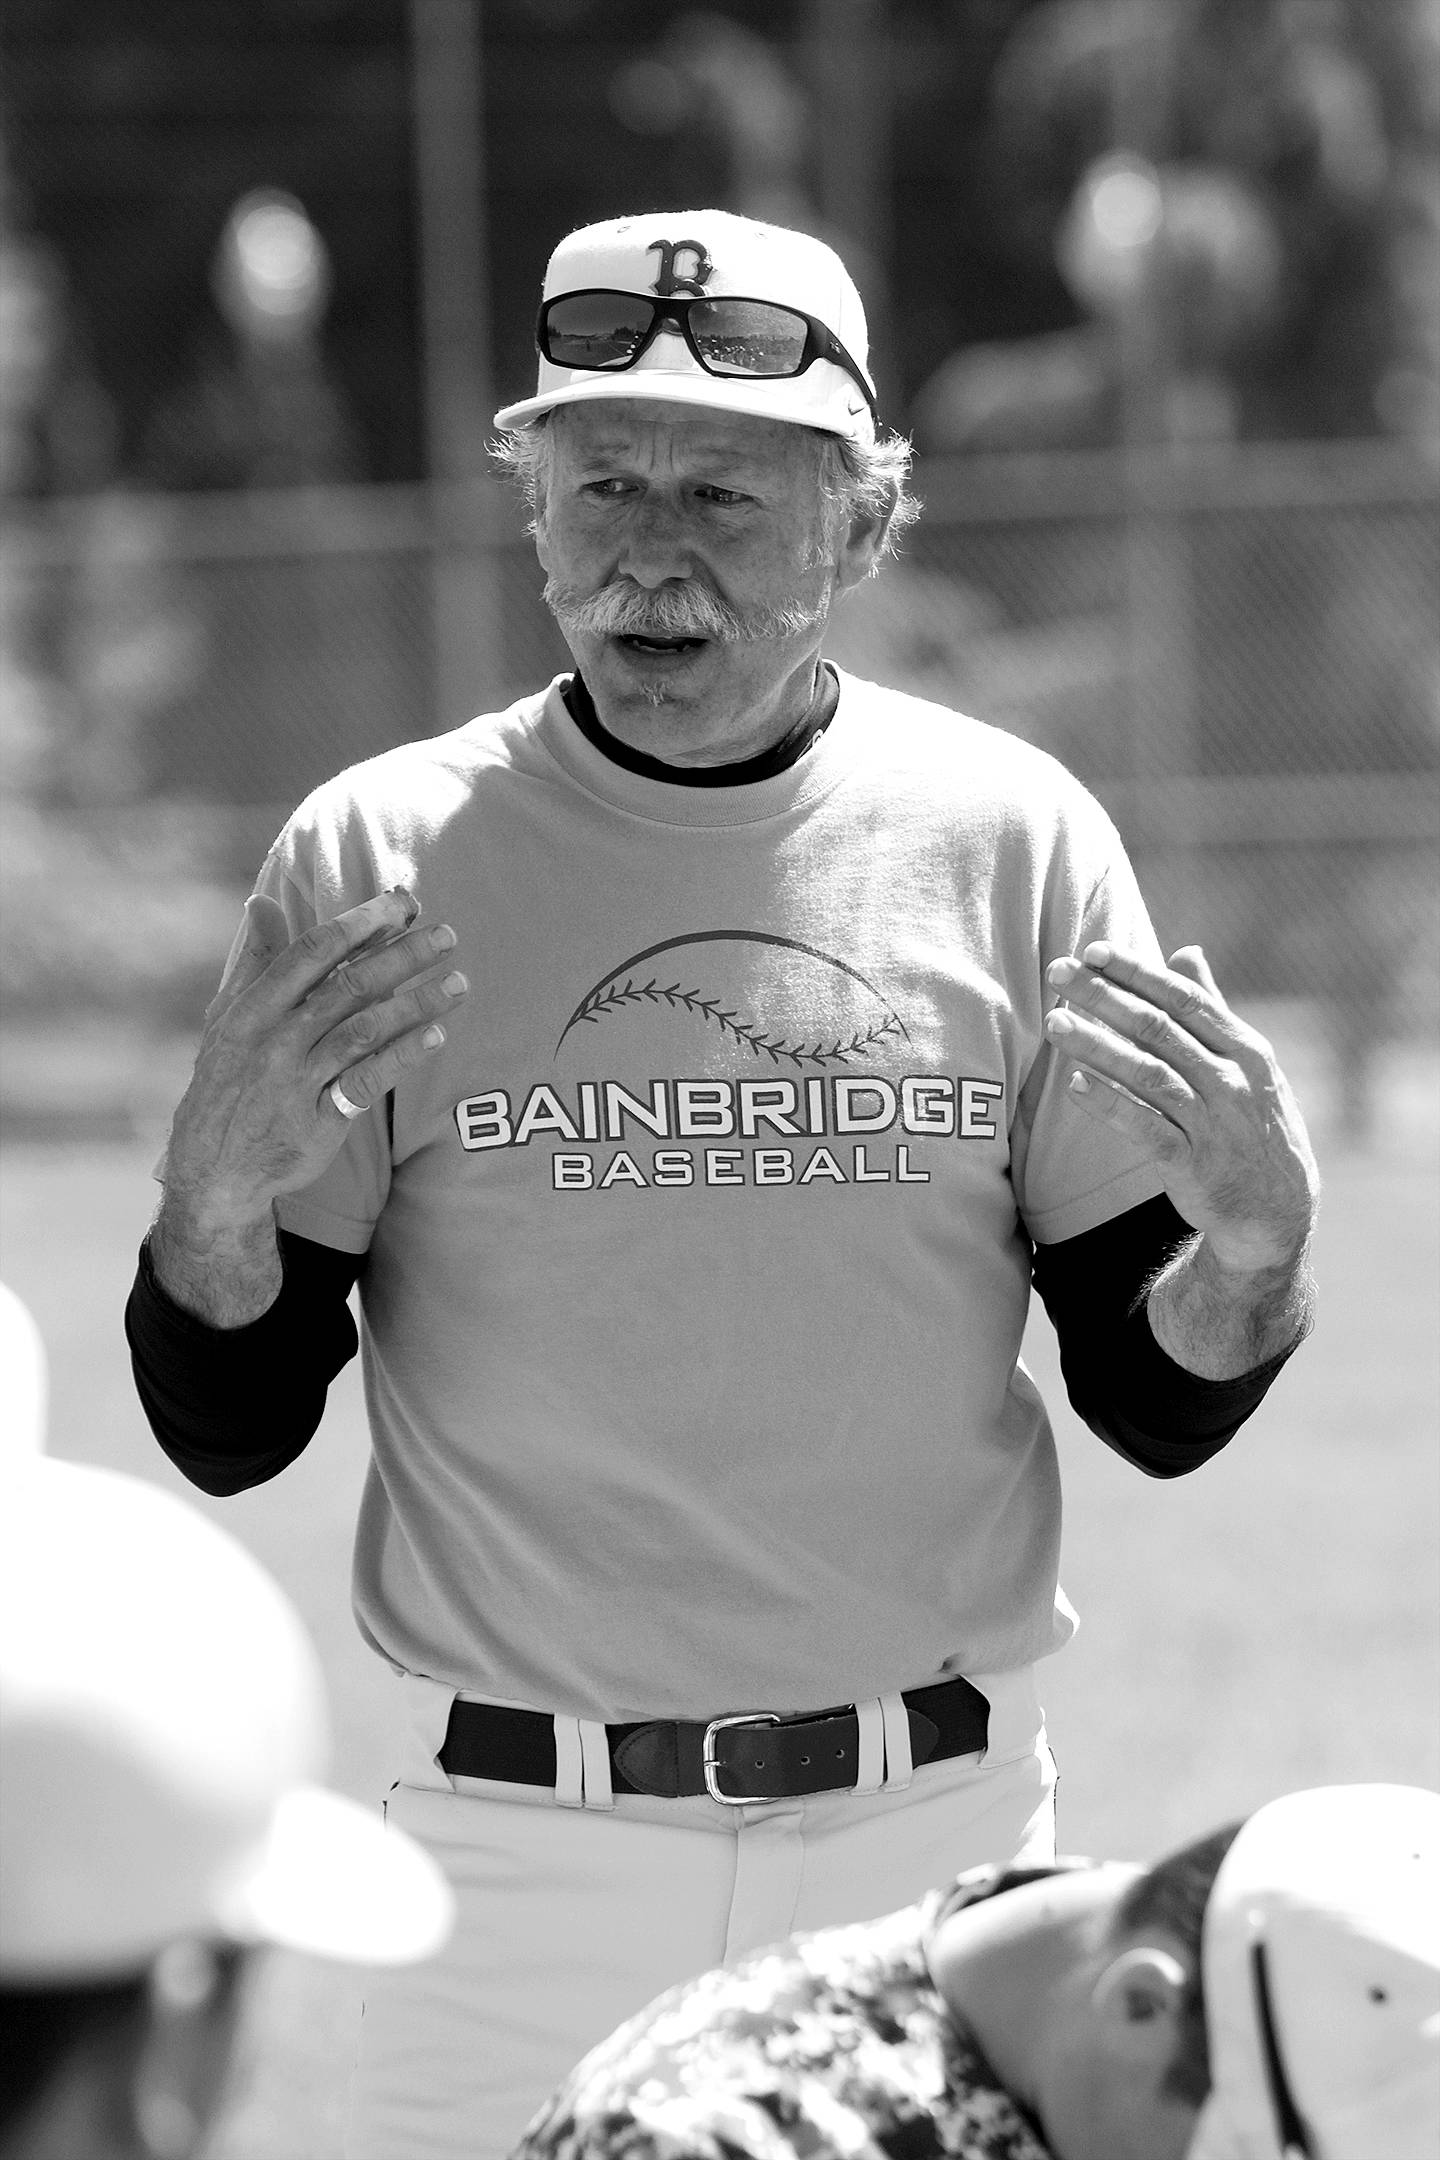 The long run home: Stalwart Spartan volunteer coach retires after 30 years of baseball